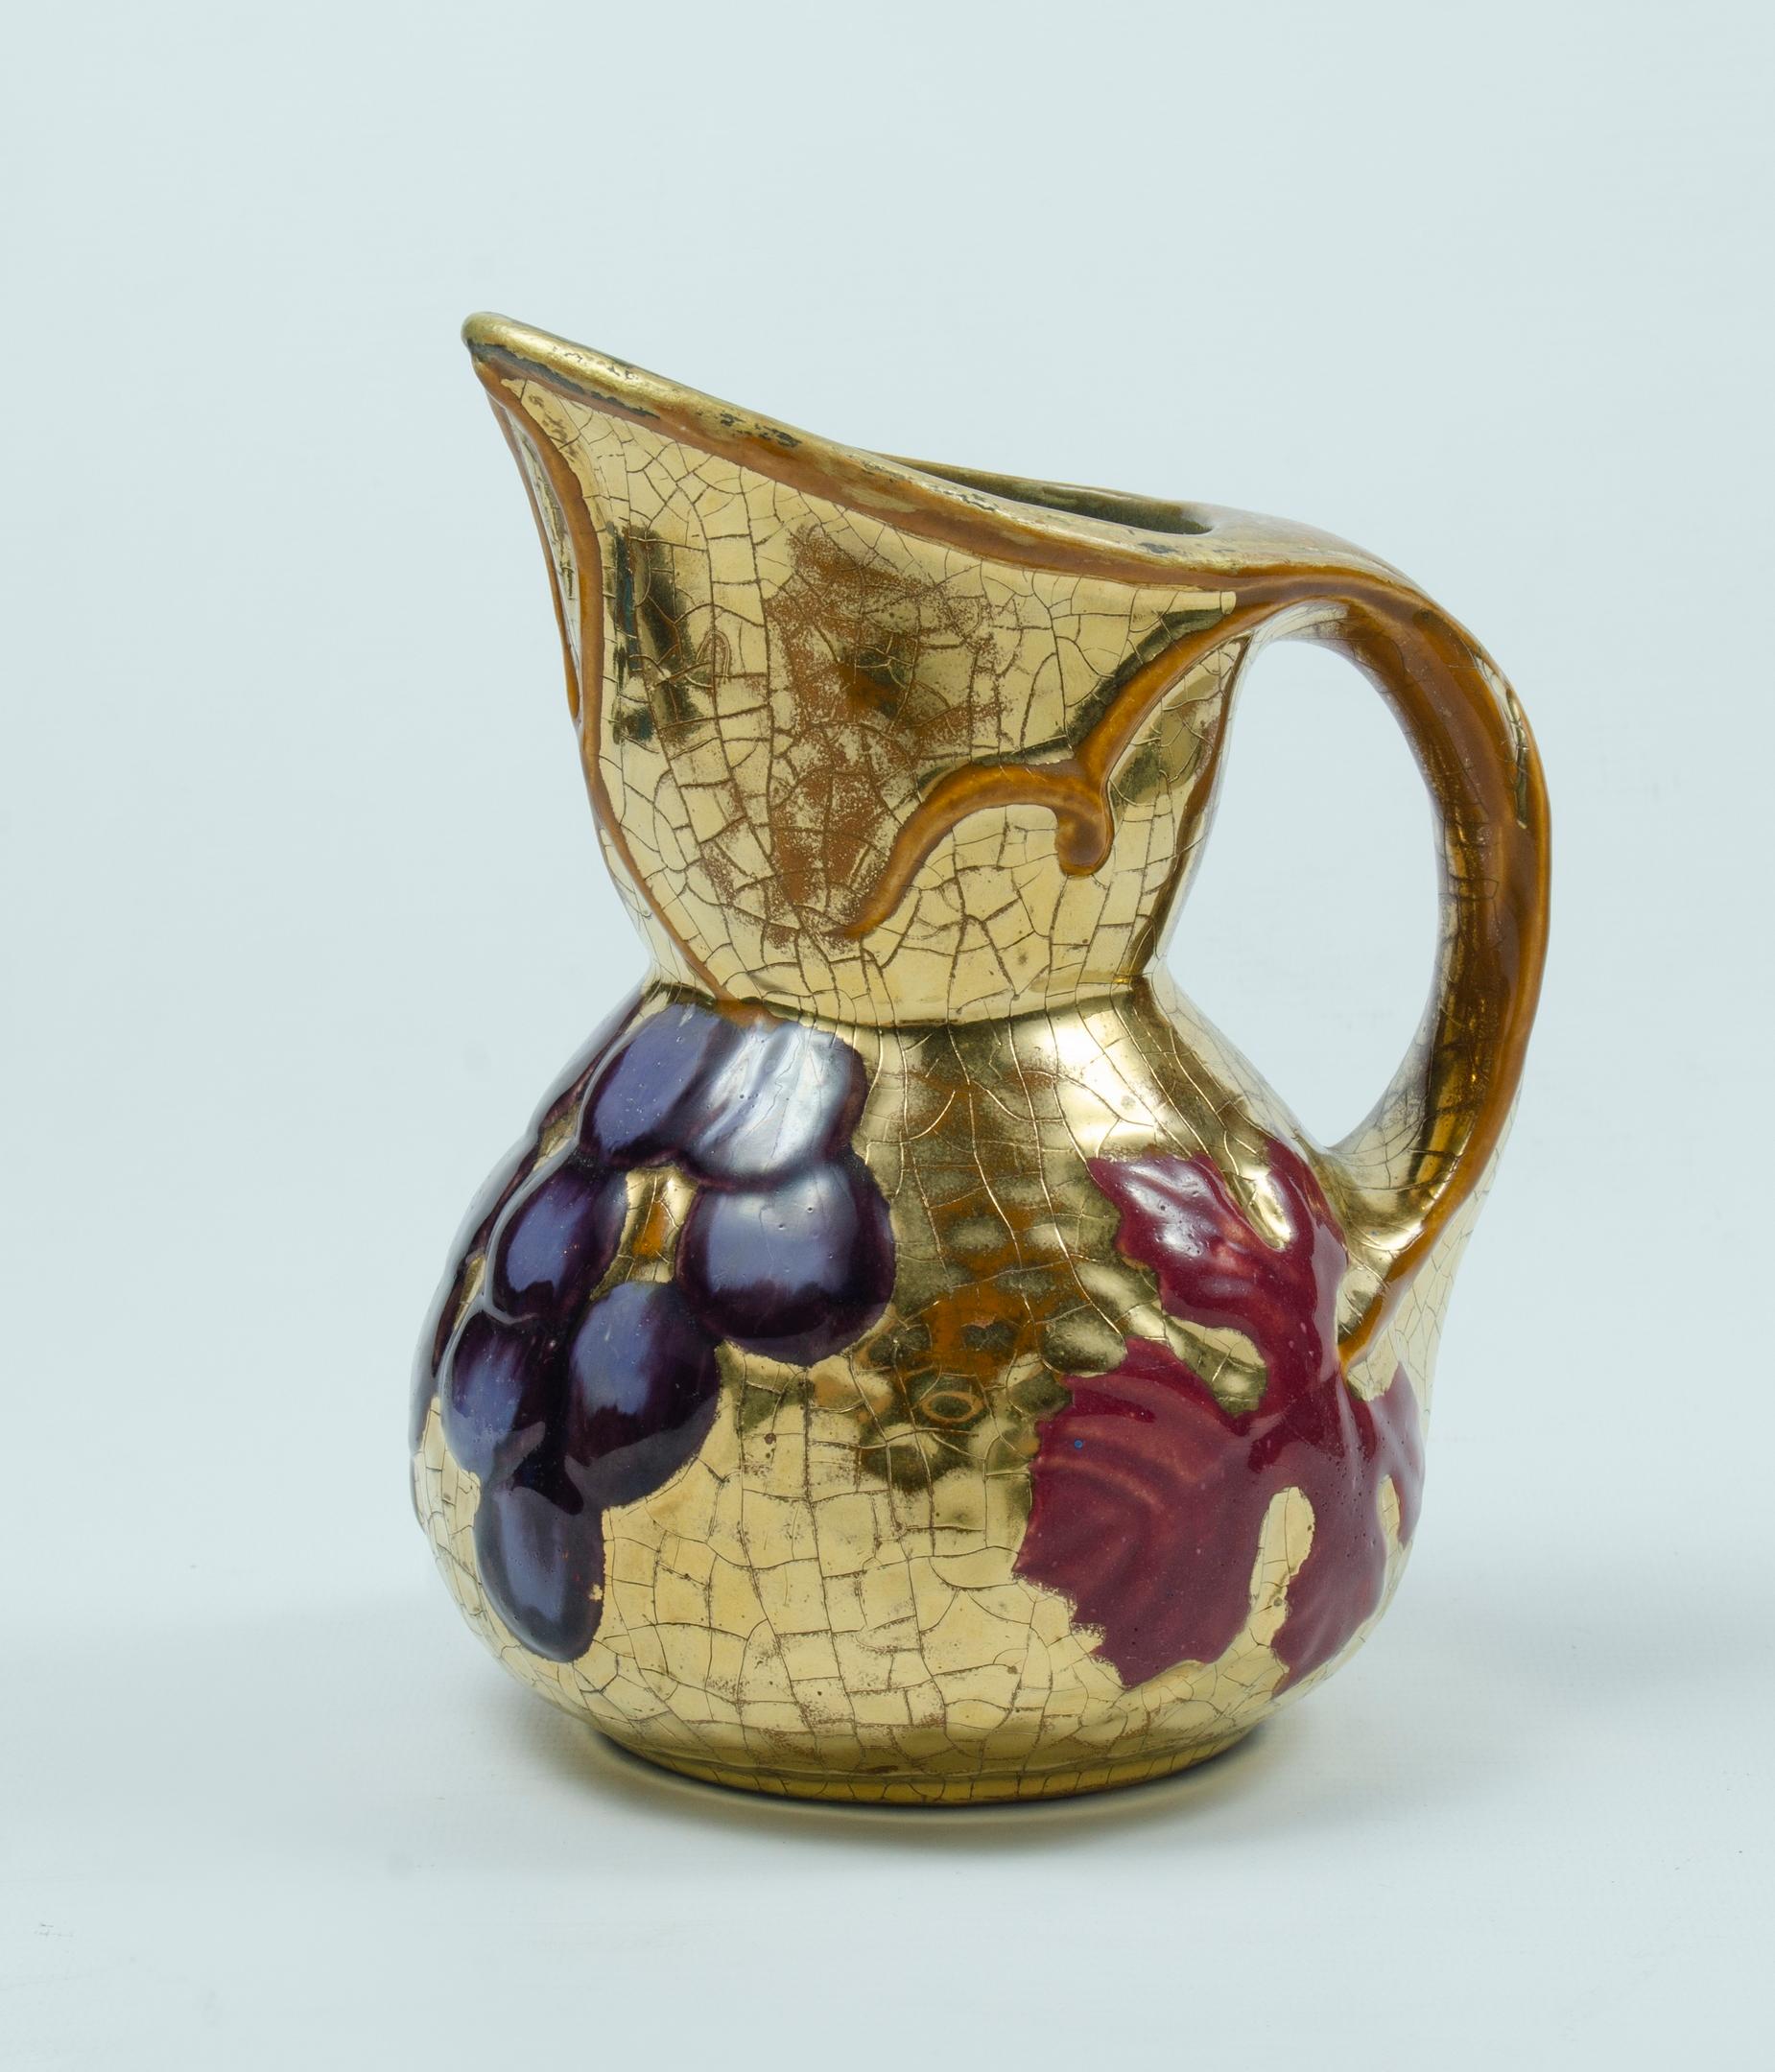 Art Nouveau vase Madeleine Lyee and marcel Guillard
perfect condition
golden color with grape motif
signed on its based
ceramic and enamel.
Art nouveau, modernist art or modernism was an international artistic and decorative movement, developed